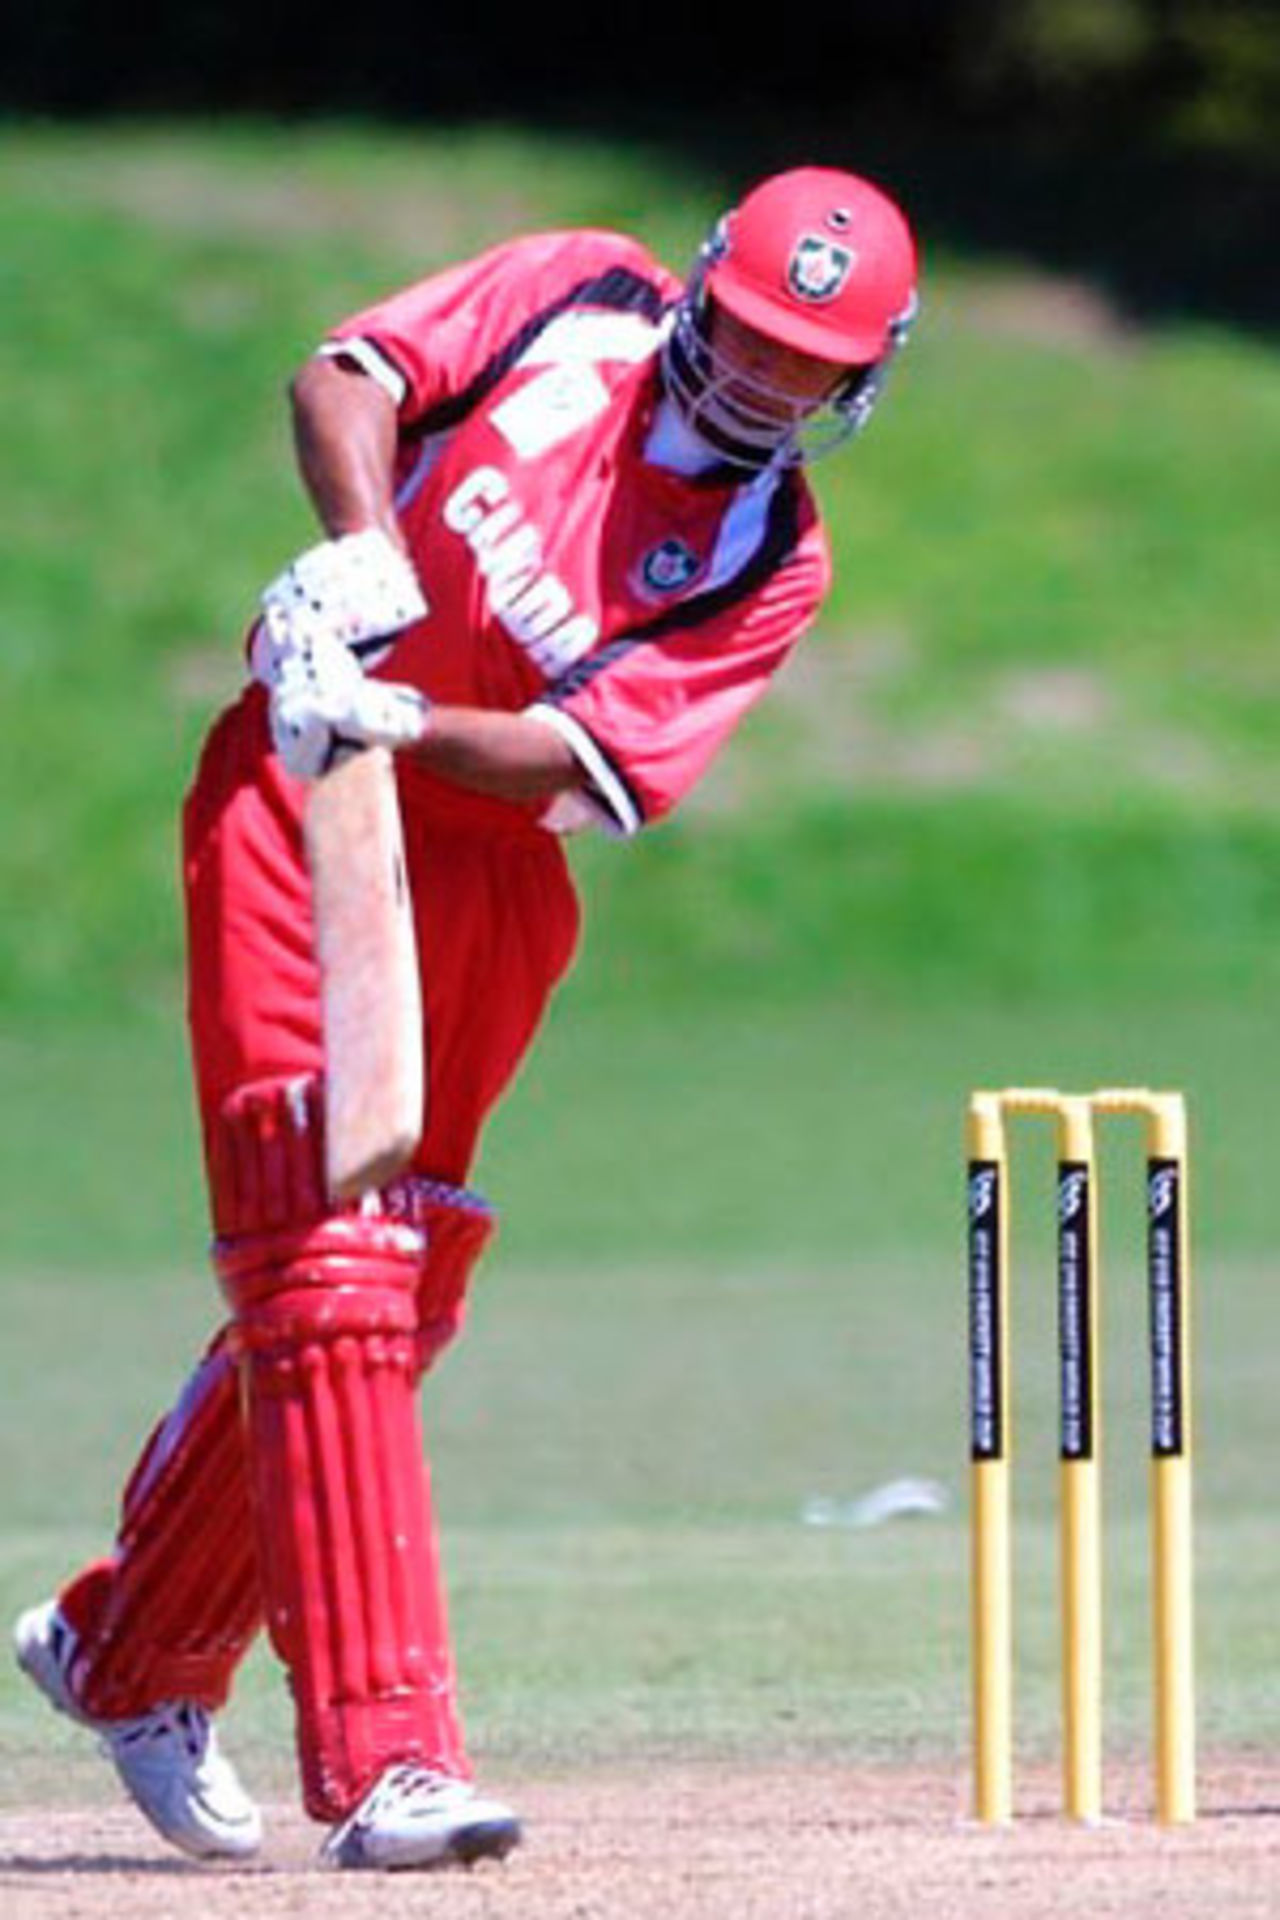 Canada Under-19 batsman Umar Bhatti drives a delivery down the ground during his innings of 33. ICC Under-19 World Cup Group A: Bangladesh Under-19s v Canada Under-19s at Colin Maiden Park, Auckland, 22 January 2002.